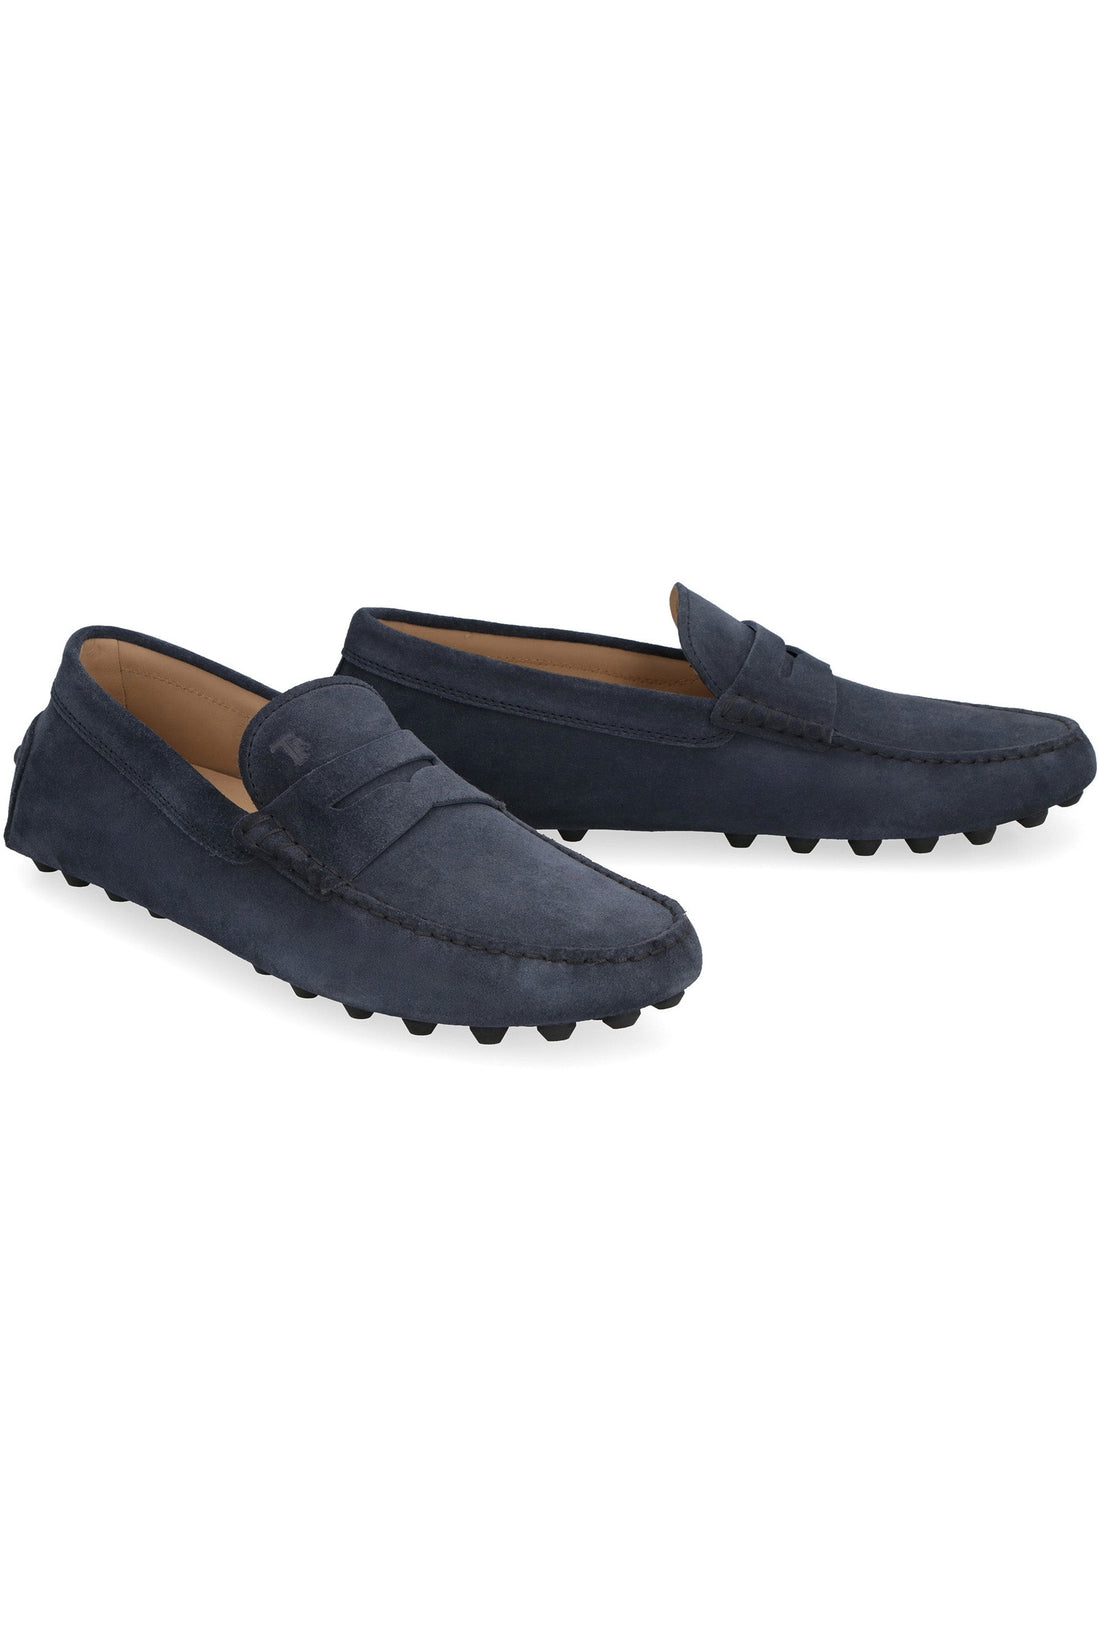 Tod's-OUTLET-SALE-Gommino suede loafers-ARCHIVIST